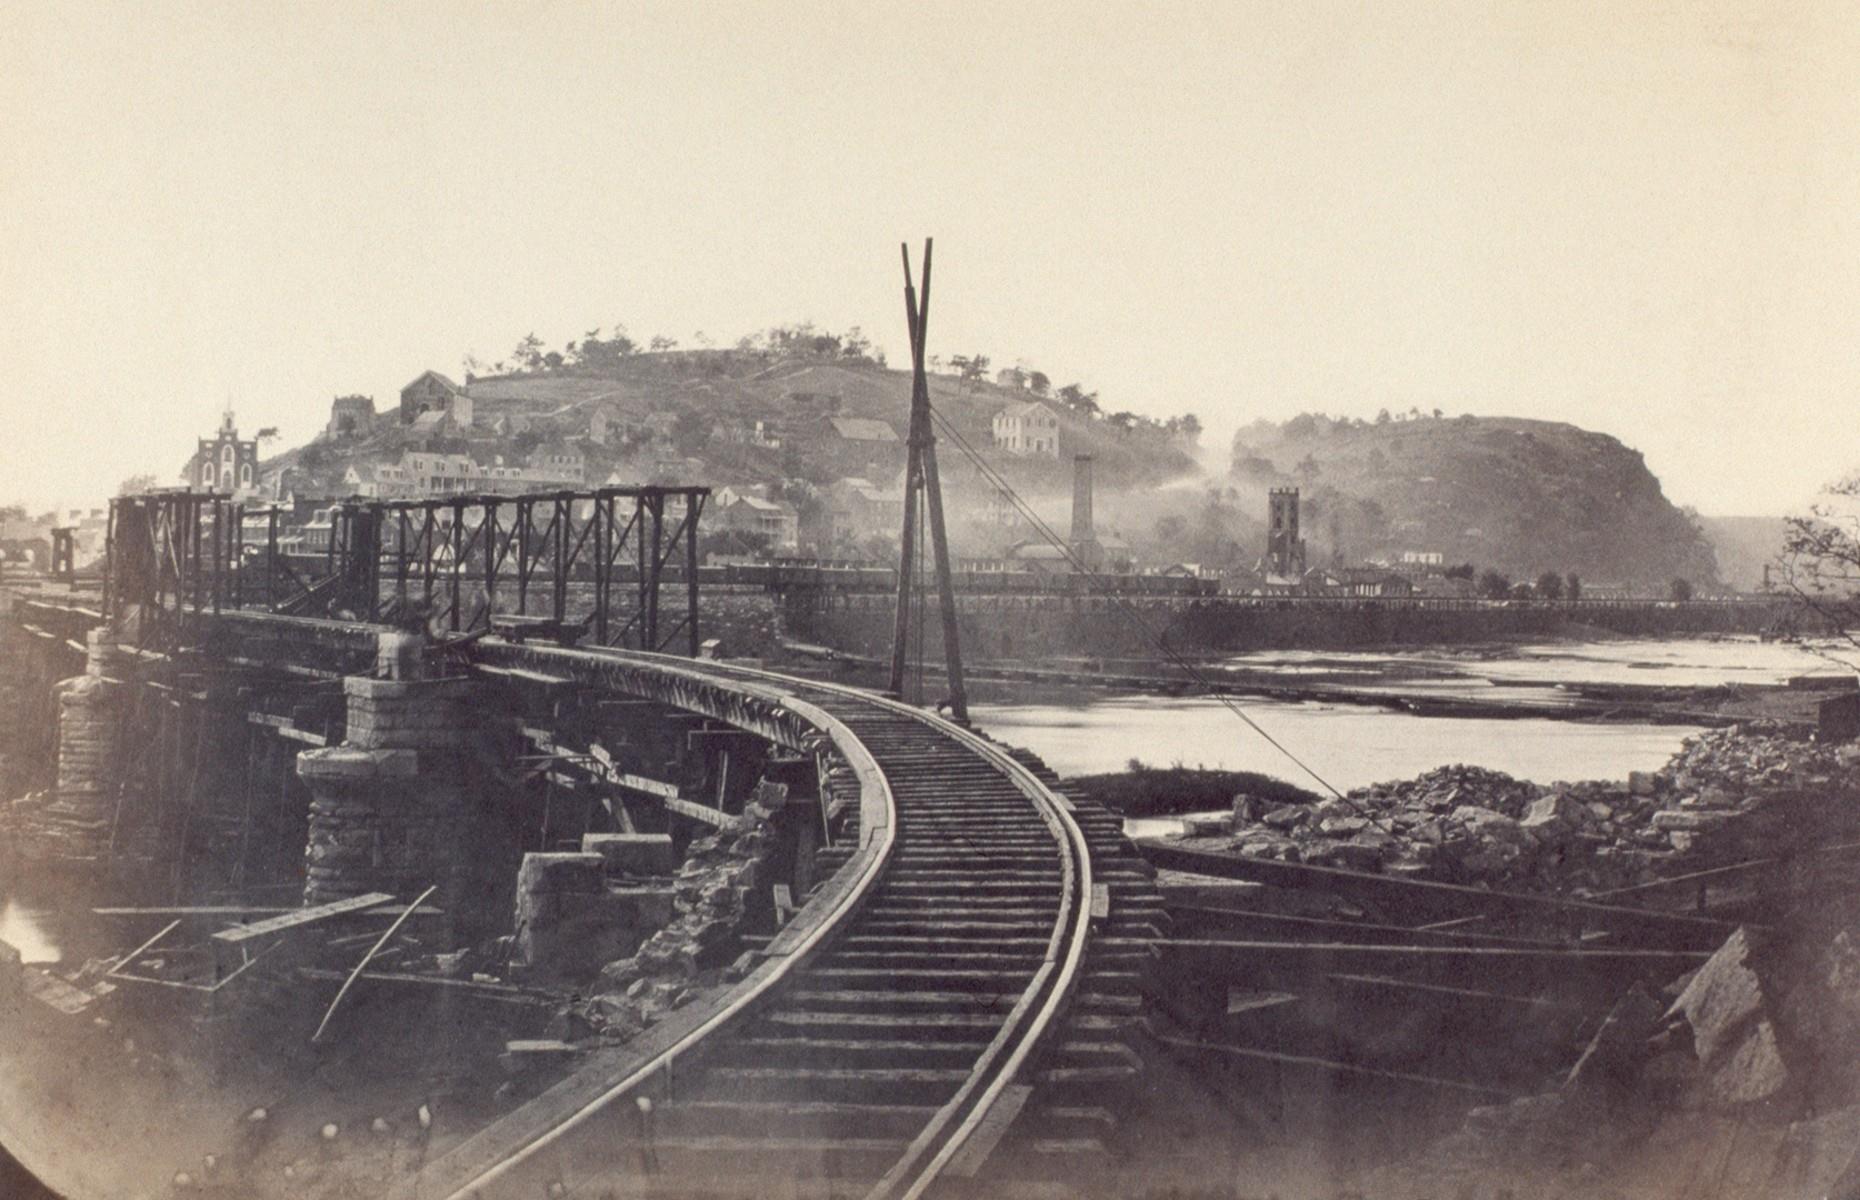 <p>By 1860, the United States had more than 30,000 miles of rails, and when the Civil War broke out it became the world’s first railway war. Trains could rapidly transport troops and supplies to the frontline, so soldiers systematically destroyed rails, bridges and rolling stock to hinder the enemy. The rail line near the federal armory at Harper’s Ferry (pictured here during the war) came under repeated attack.</p>